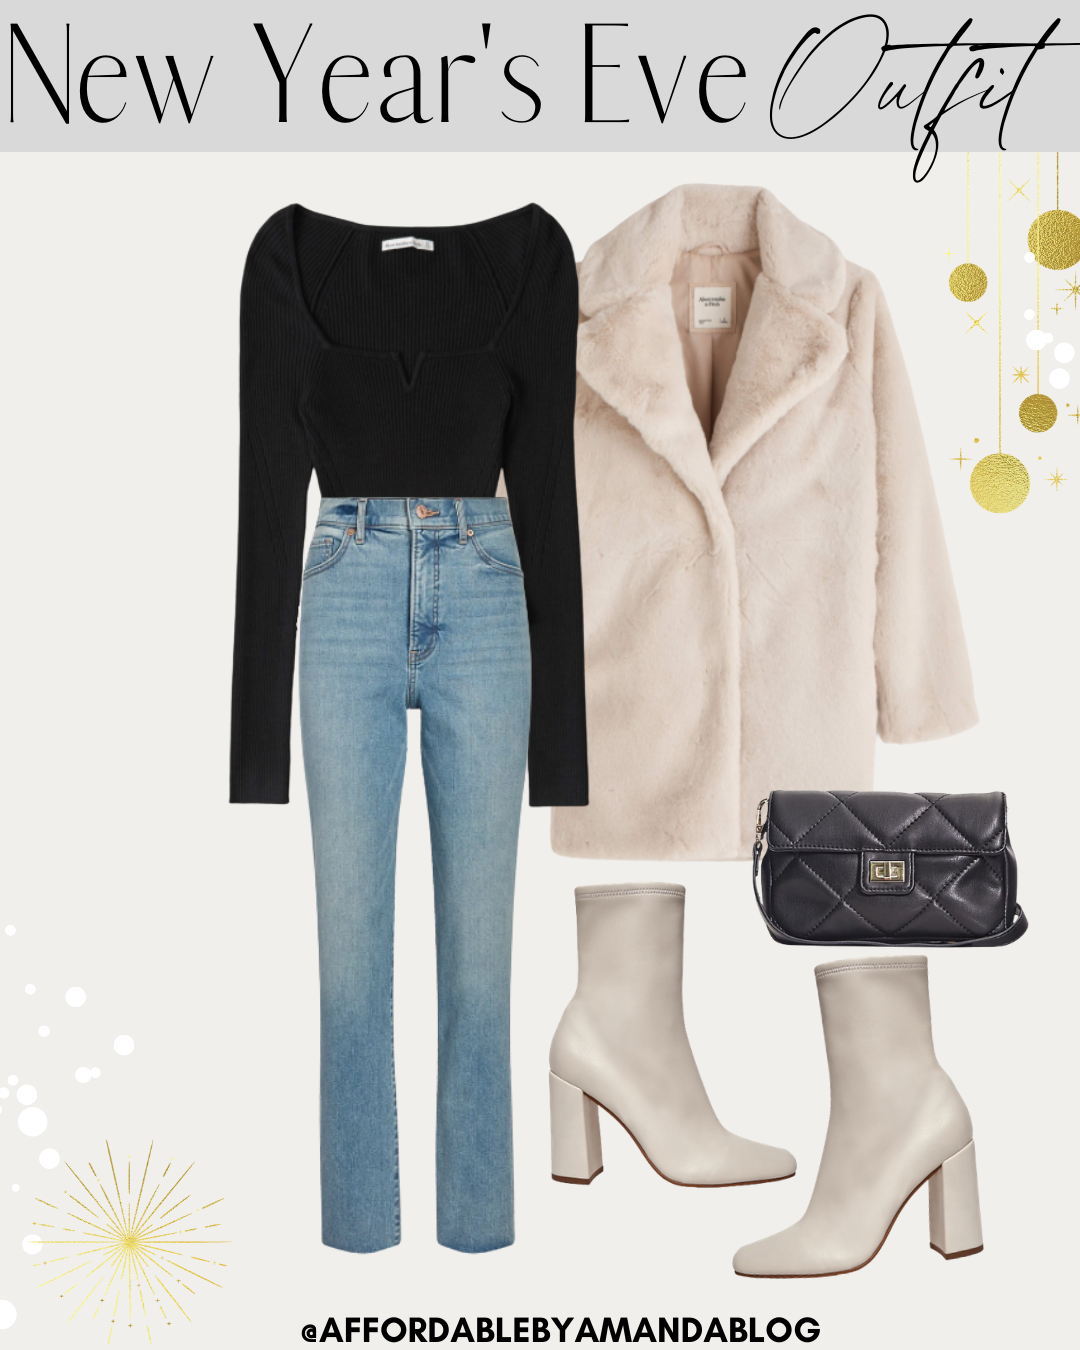 New Years Eve Outfit Ideas 2020 - Affordable by Amanda